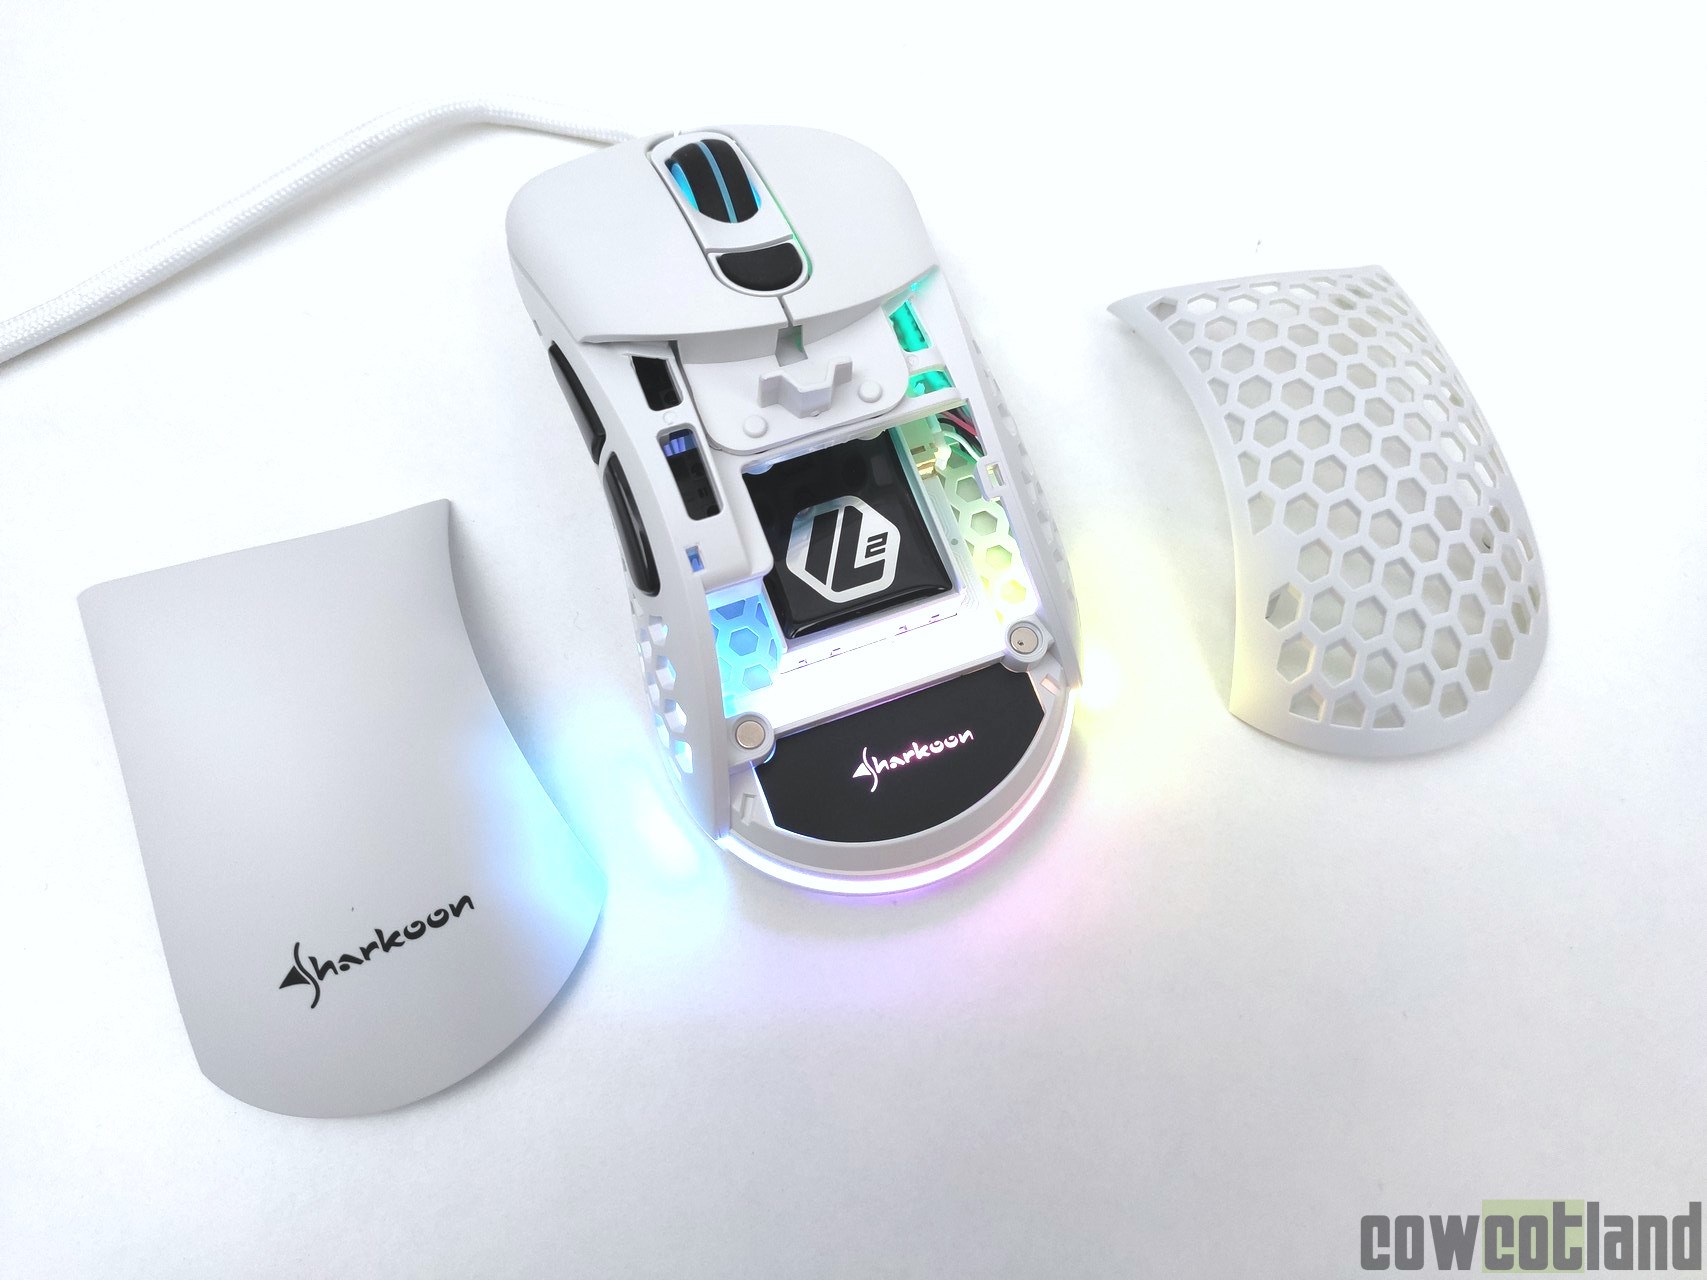 Image 43518, galerie Test souris Gaming Sharkoon Light 200 : Zowie-Killer ?